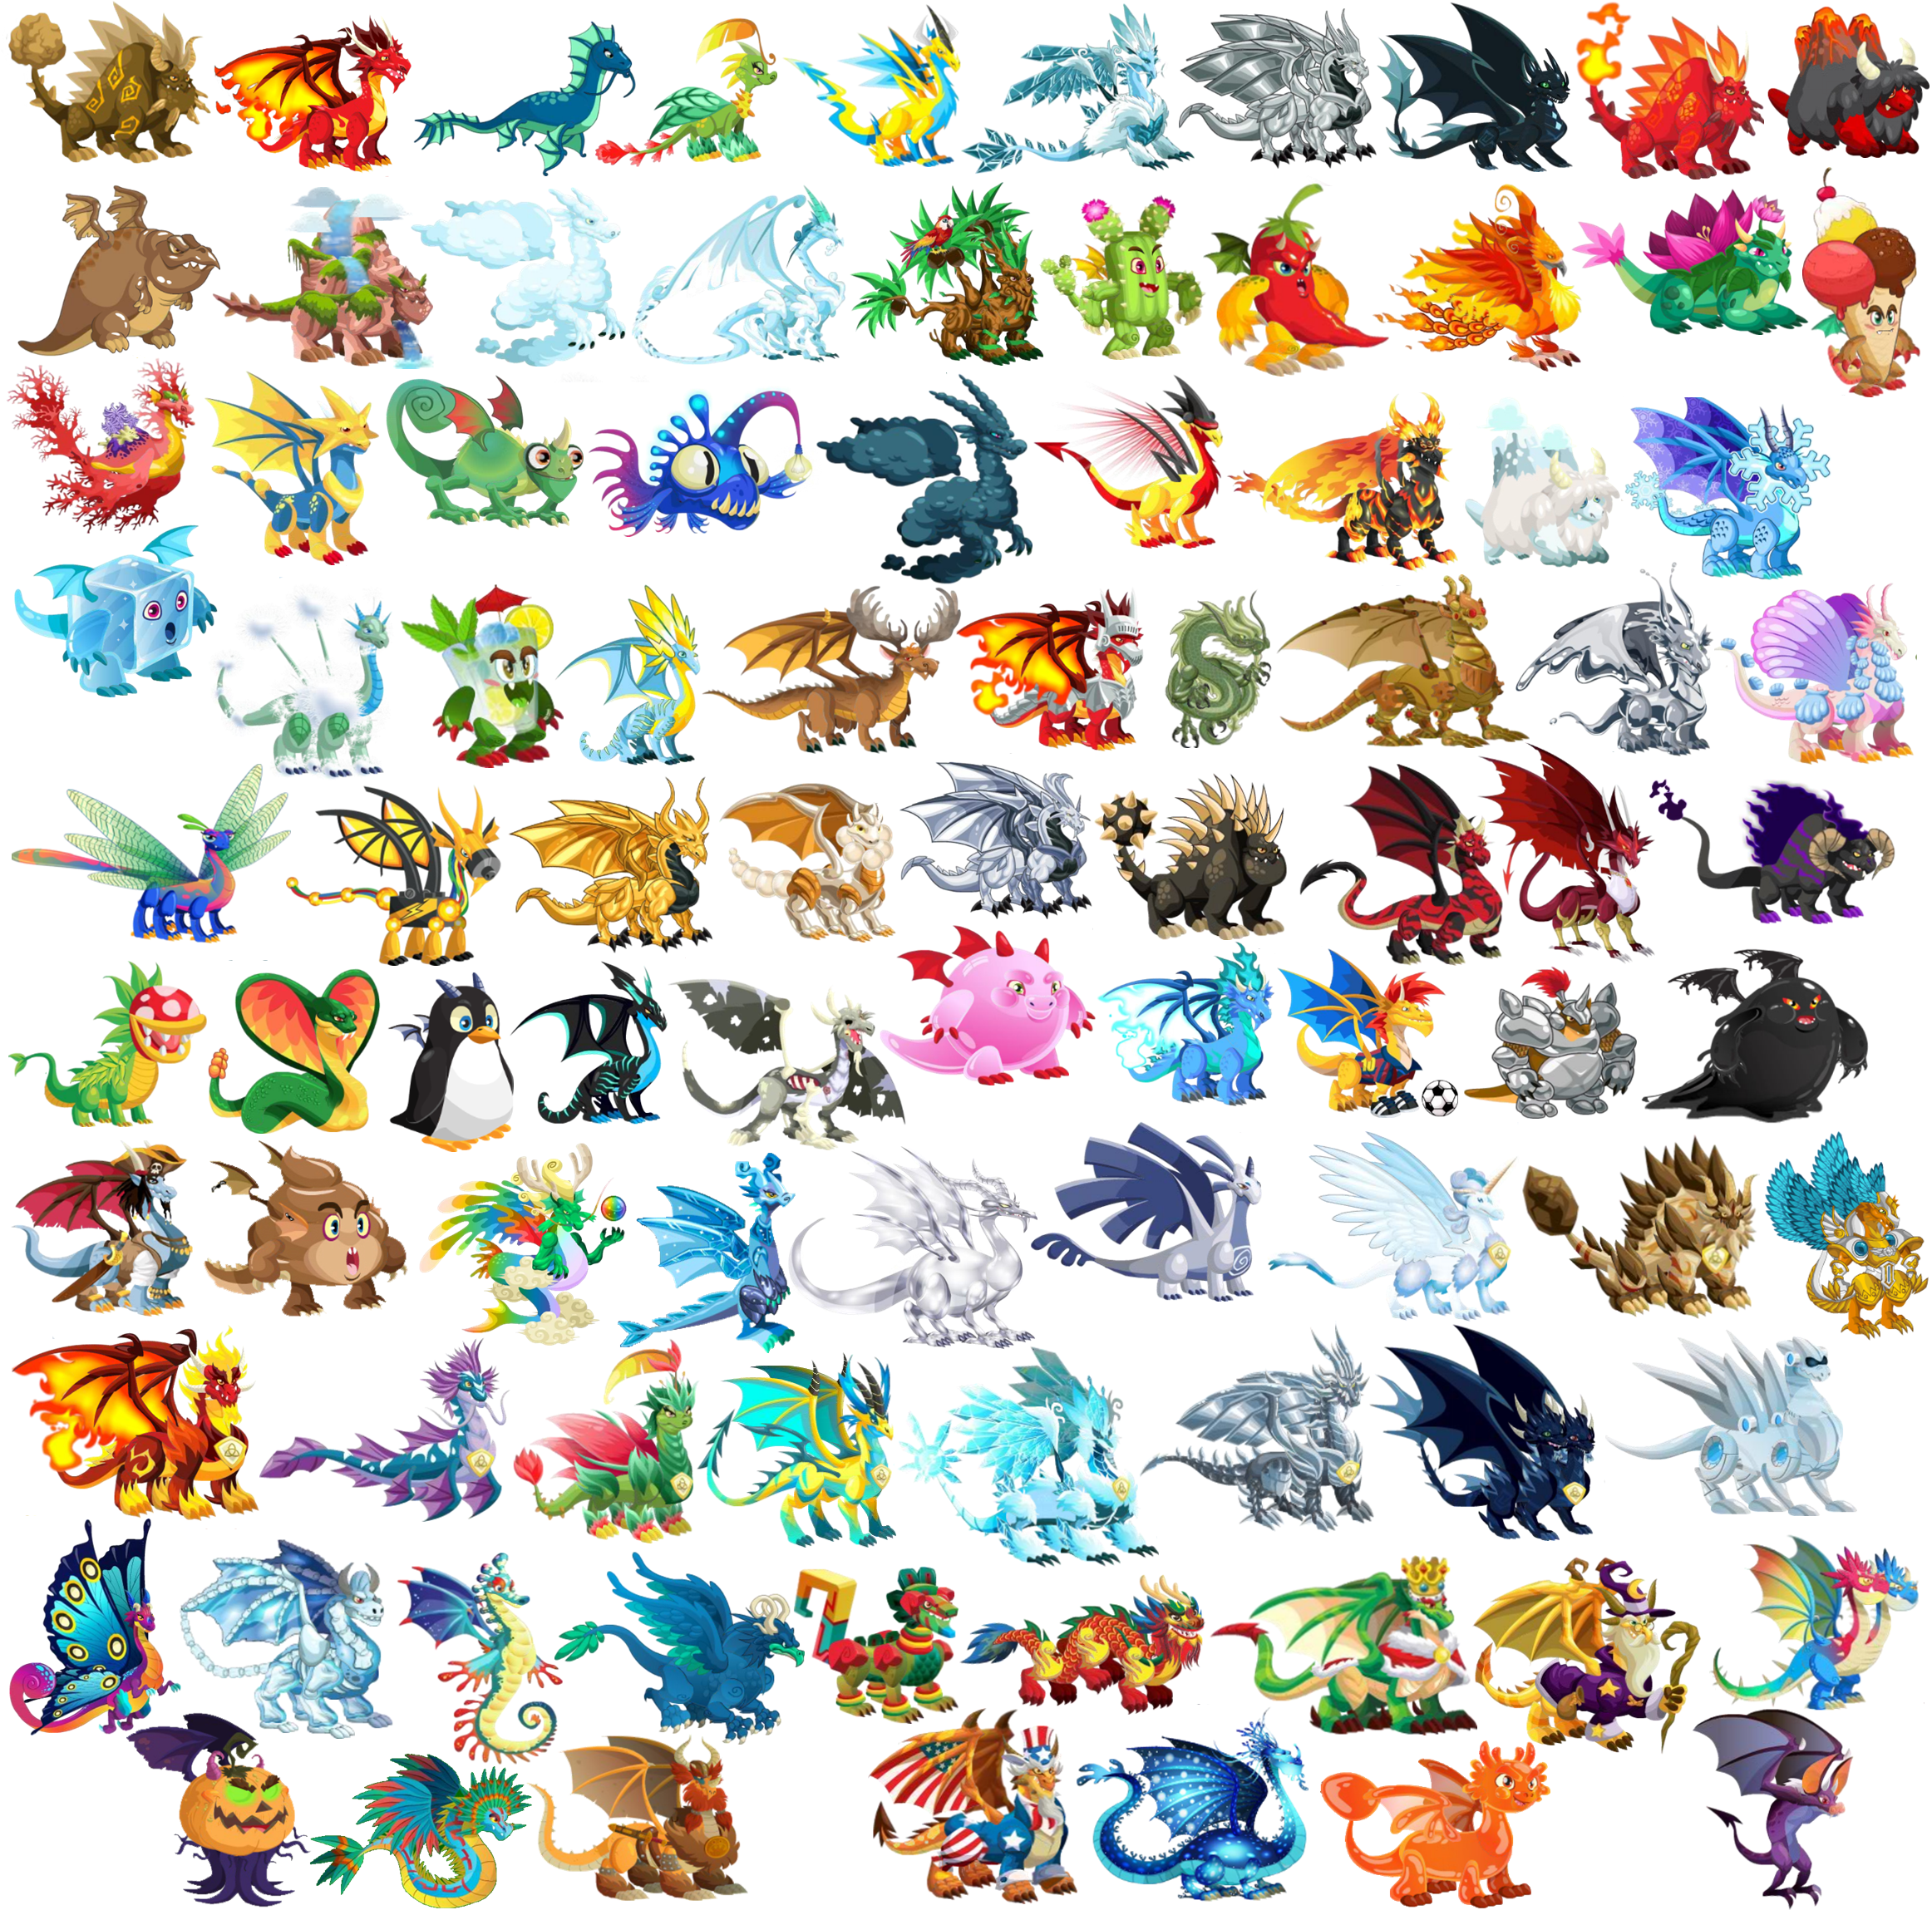 Image ALL DRAGONS.png Dragon City Wiki